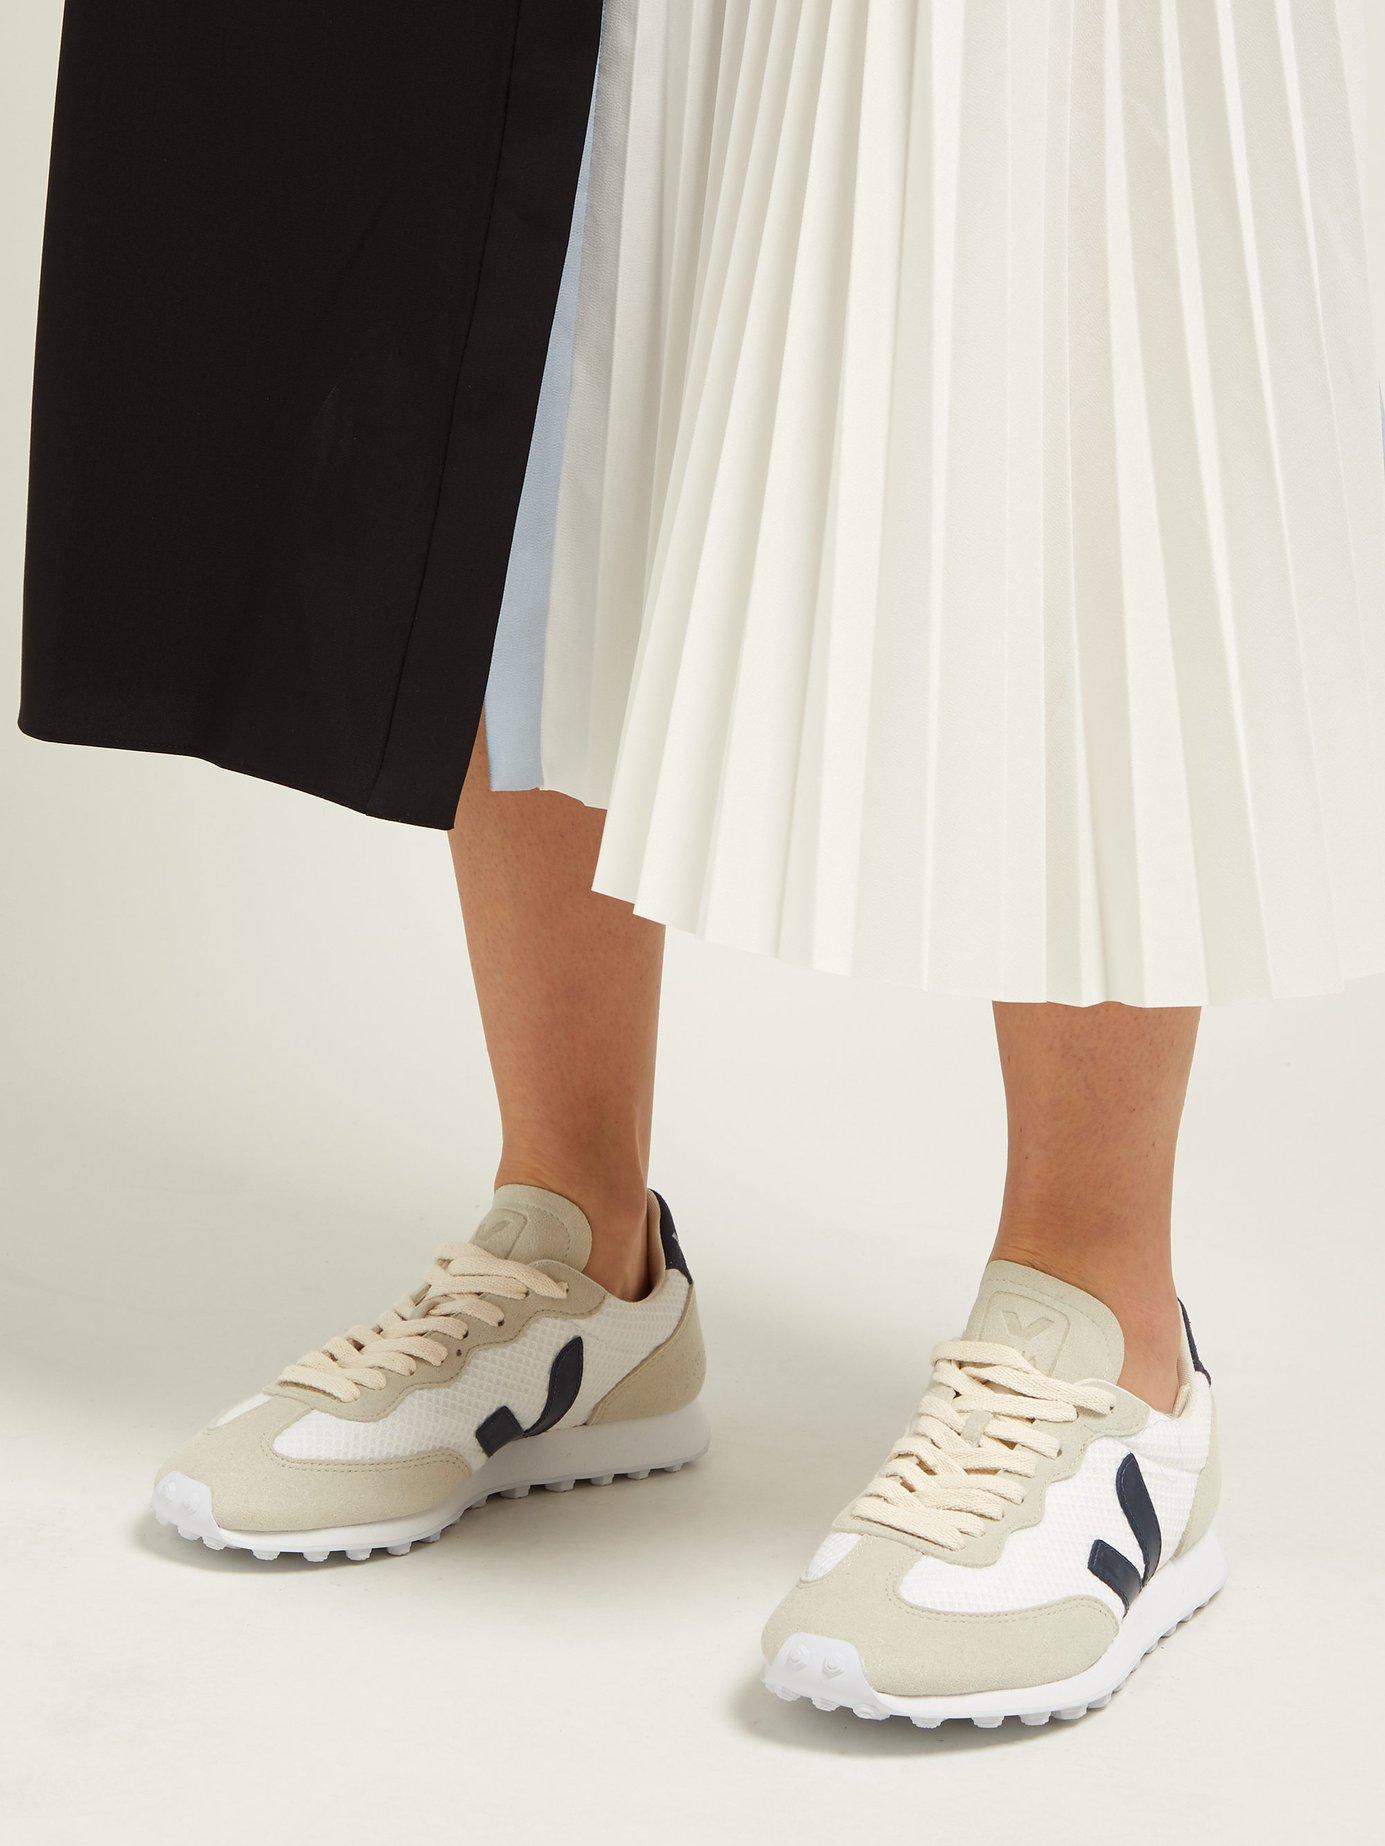 Veja Rio Low Top Trainers in White Lyst